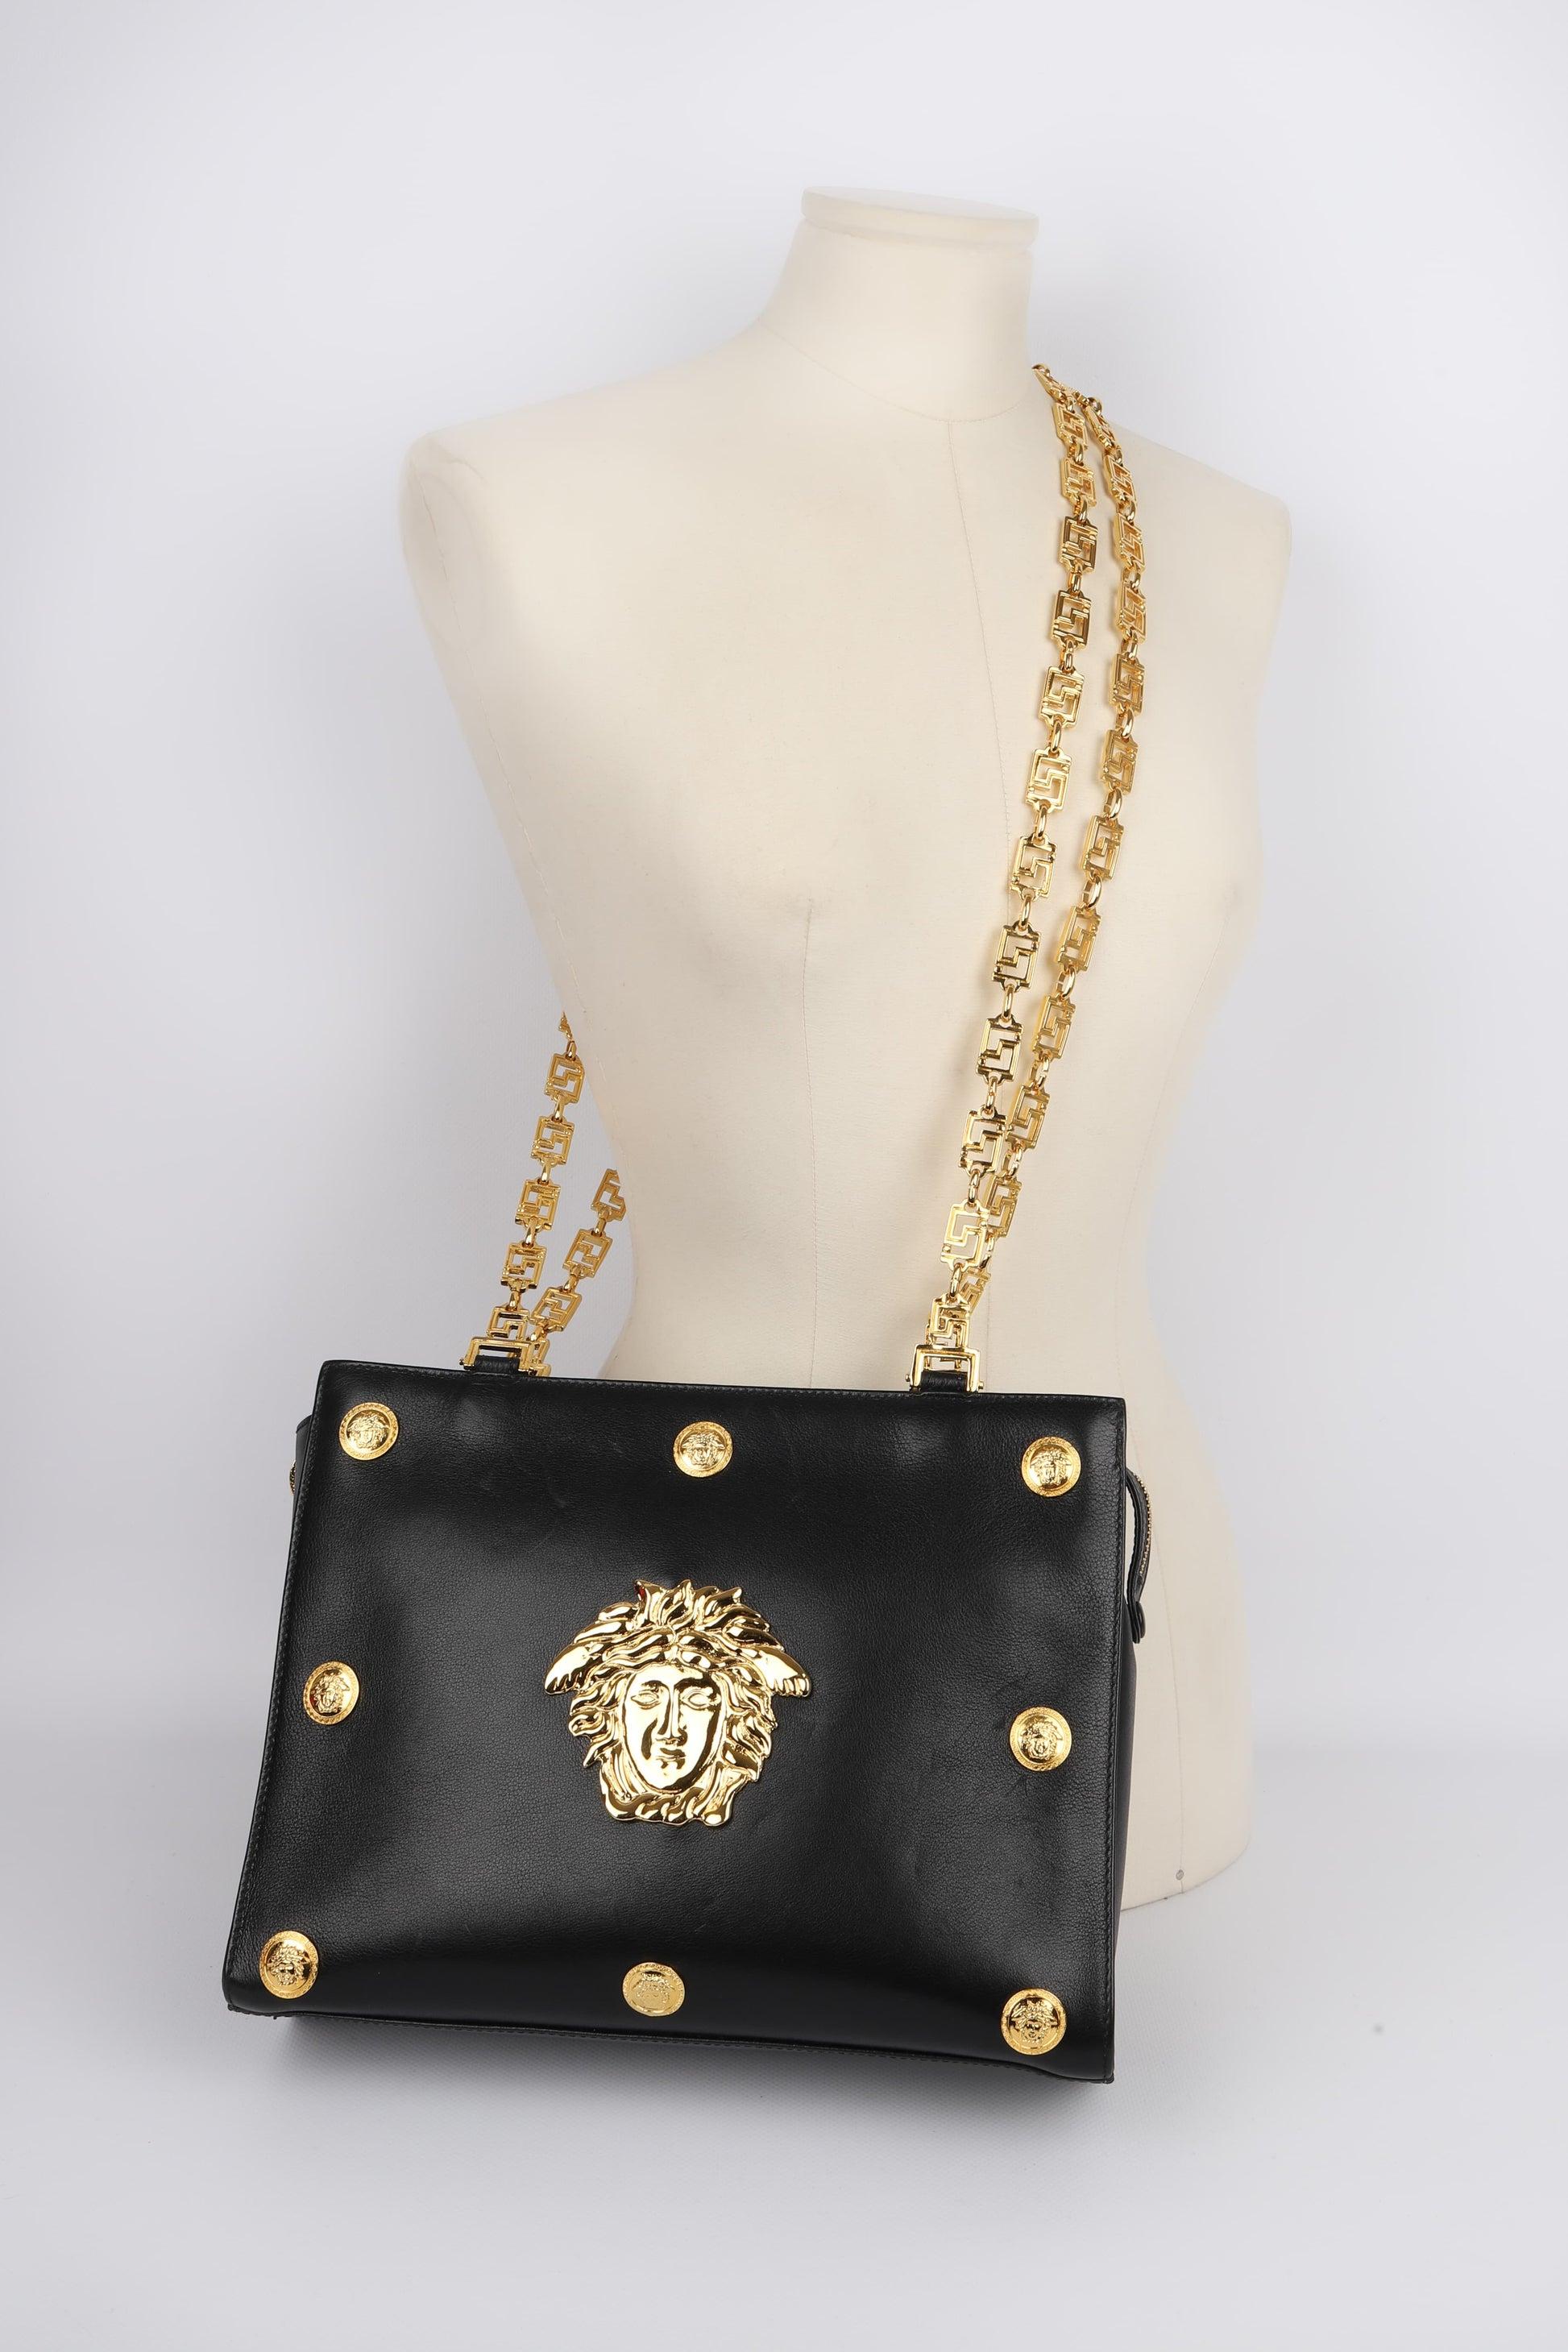 Gianni Versace Black Leather Bag with Golden Metal Elements For Sale 6